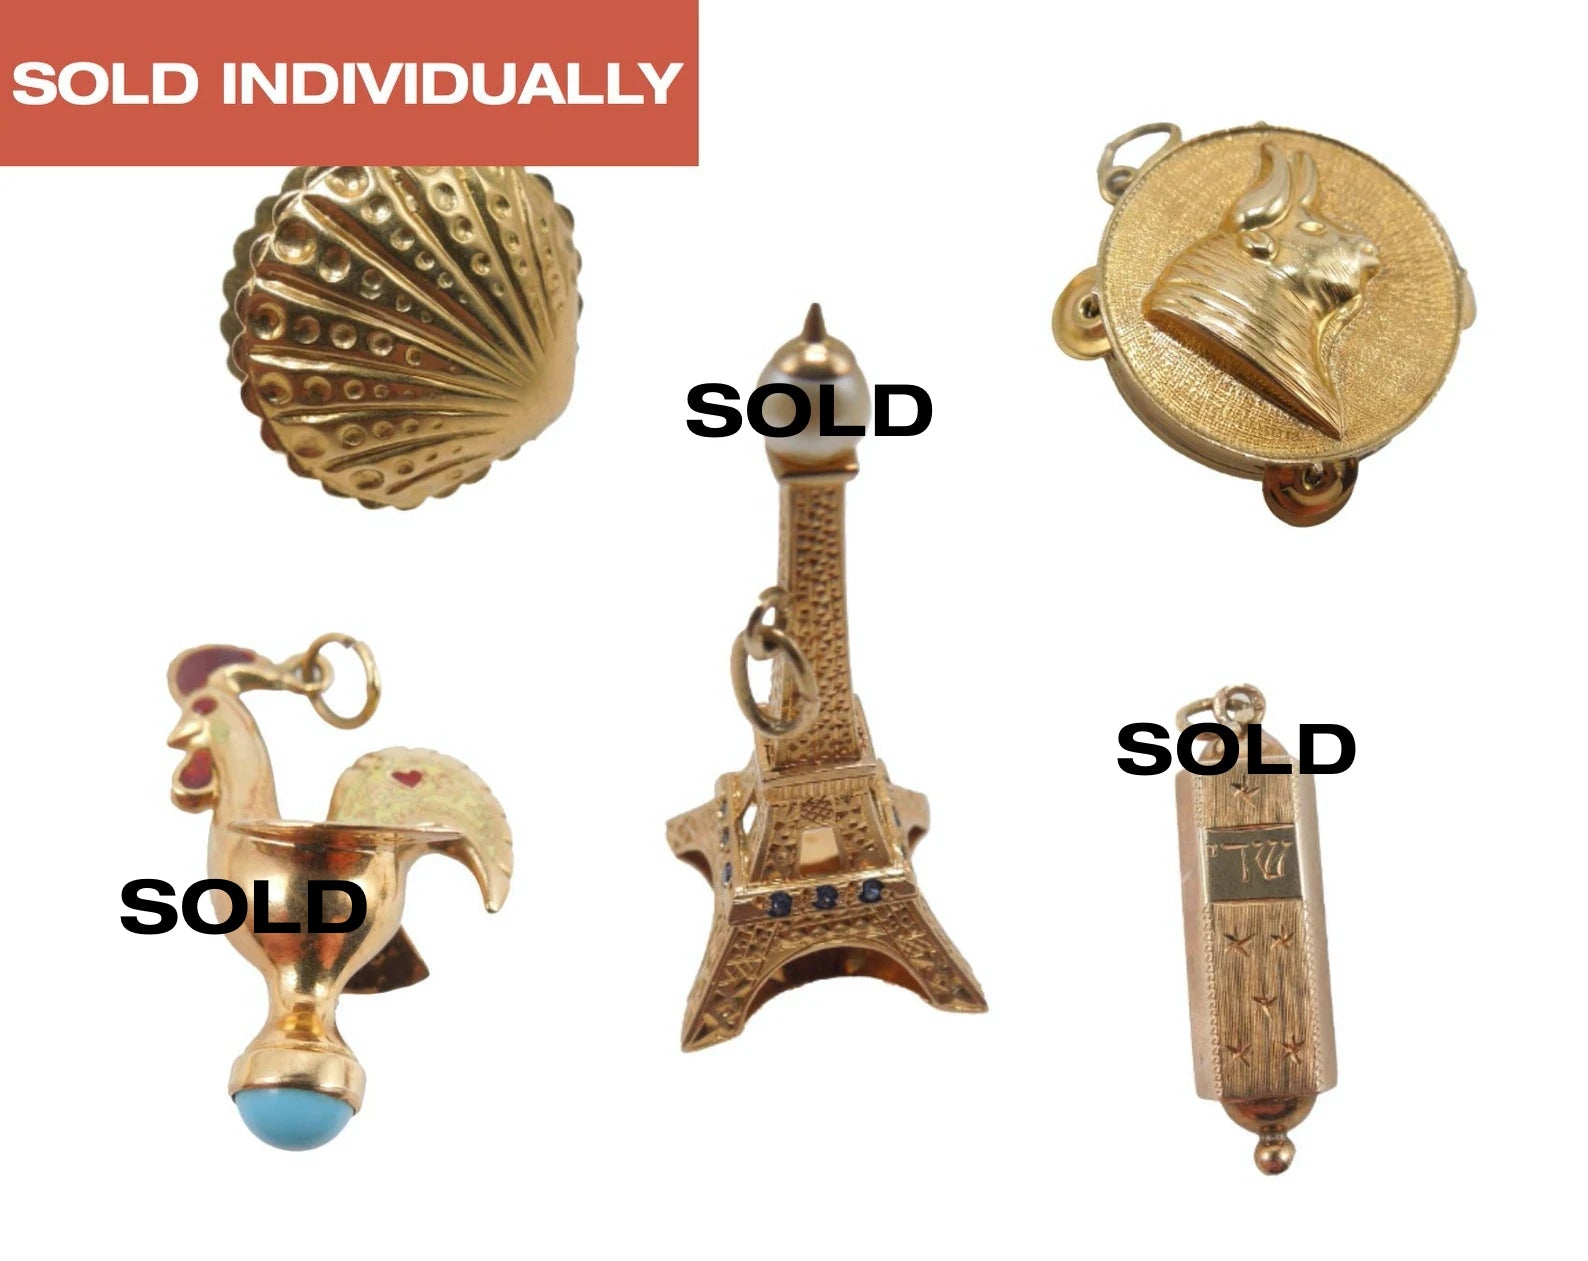 Lot of 5 14K Gold Charms for Charm Bracelet - Eiffel Tower, Mezuzah, Rooster, Tamborine, Oyster with Pearl